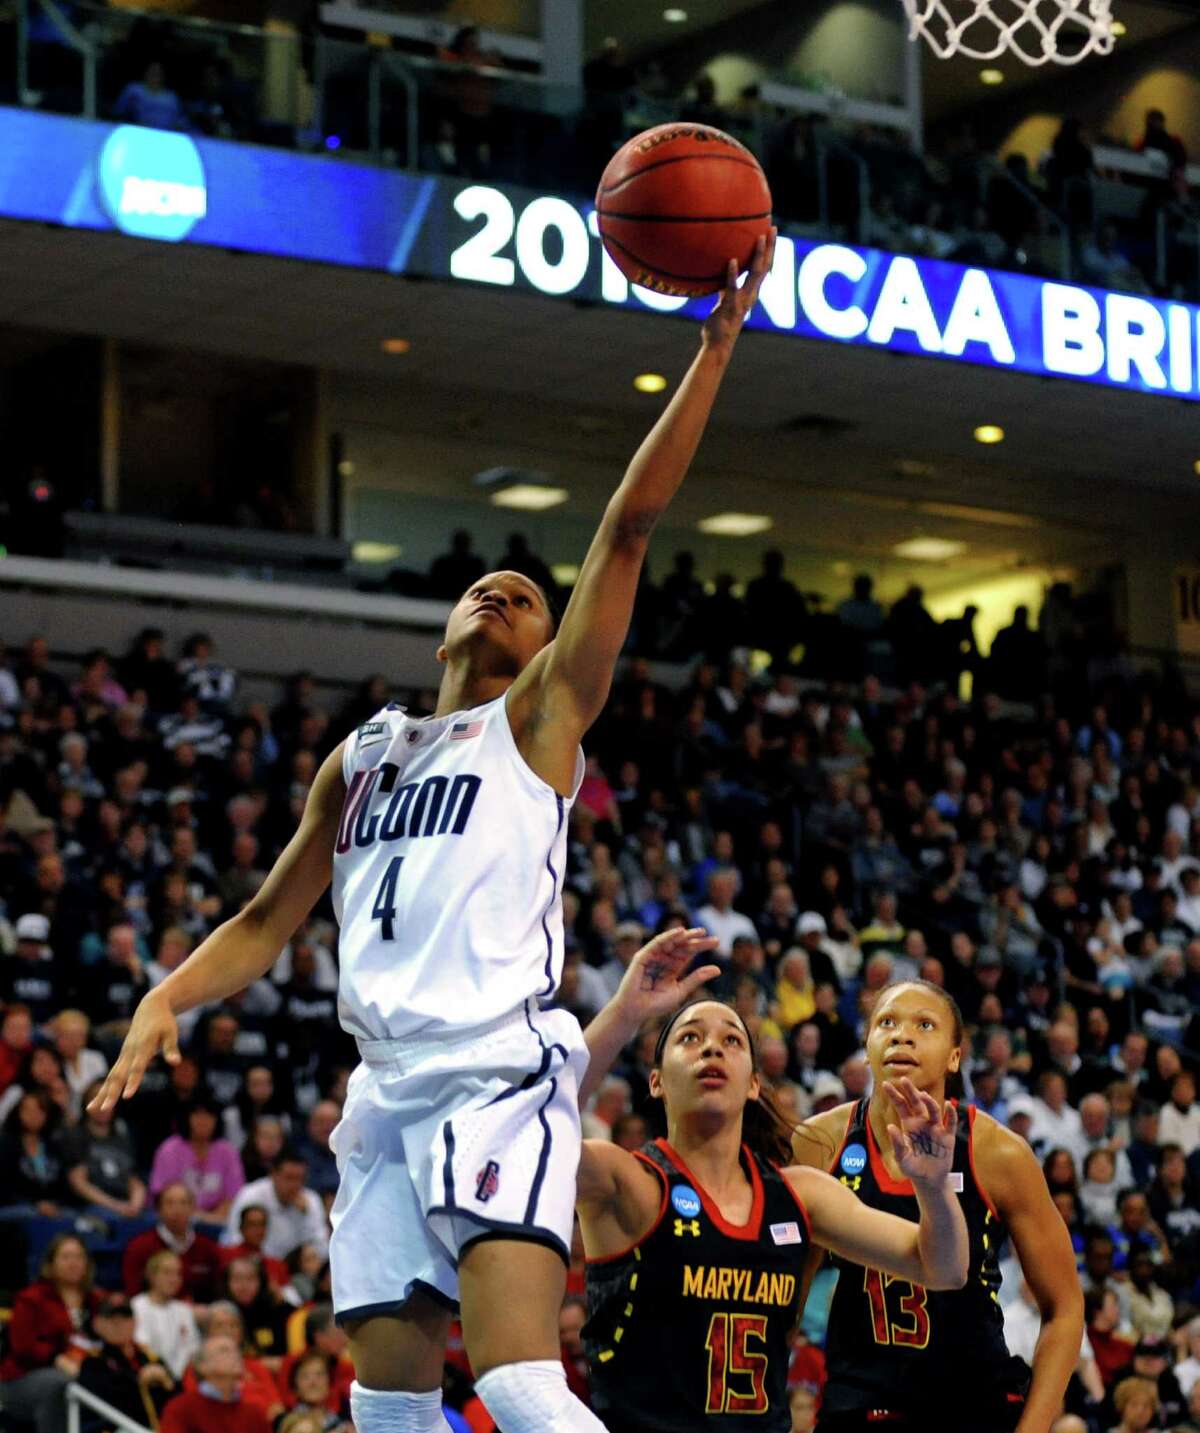 UConn's Moriah Jefferson lays up the ball, during the women's NCAA Tournament Regional Semifinals action against University of Maryland at the Webster Bank Arena in Bridgeport, Conn. on Saturday March 30, 2013.